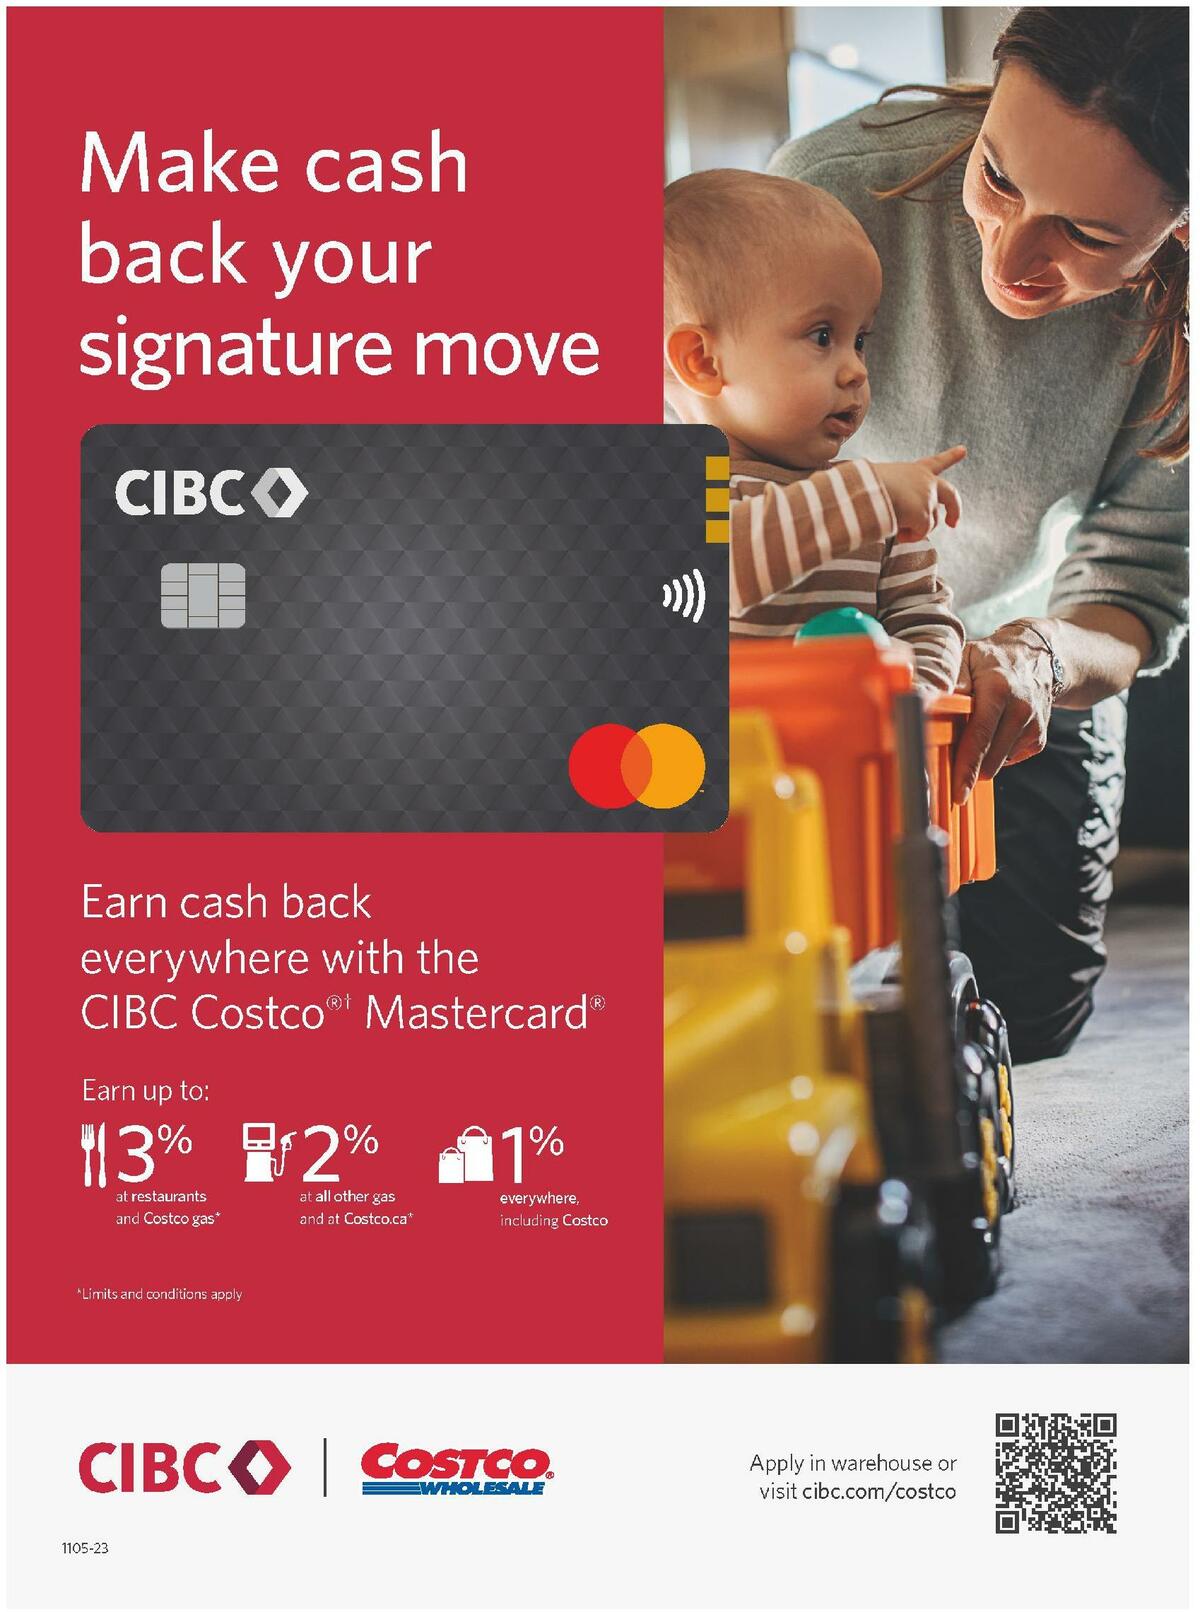 Costco Connection March Flyer from March 1